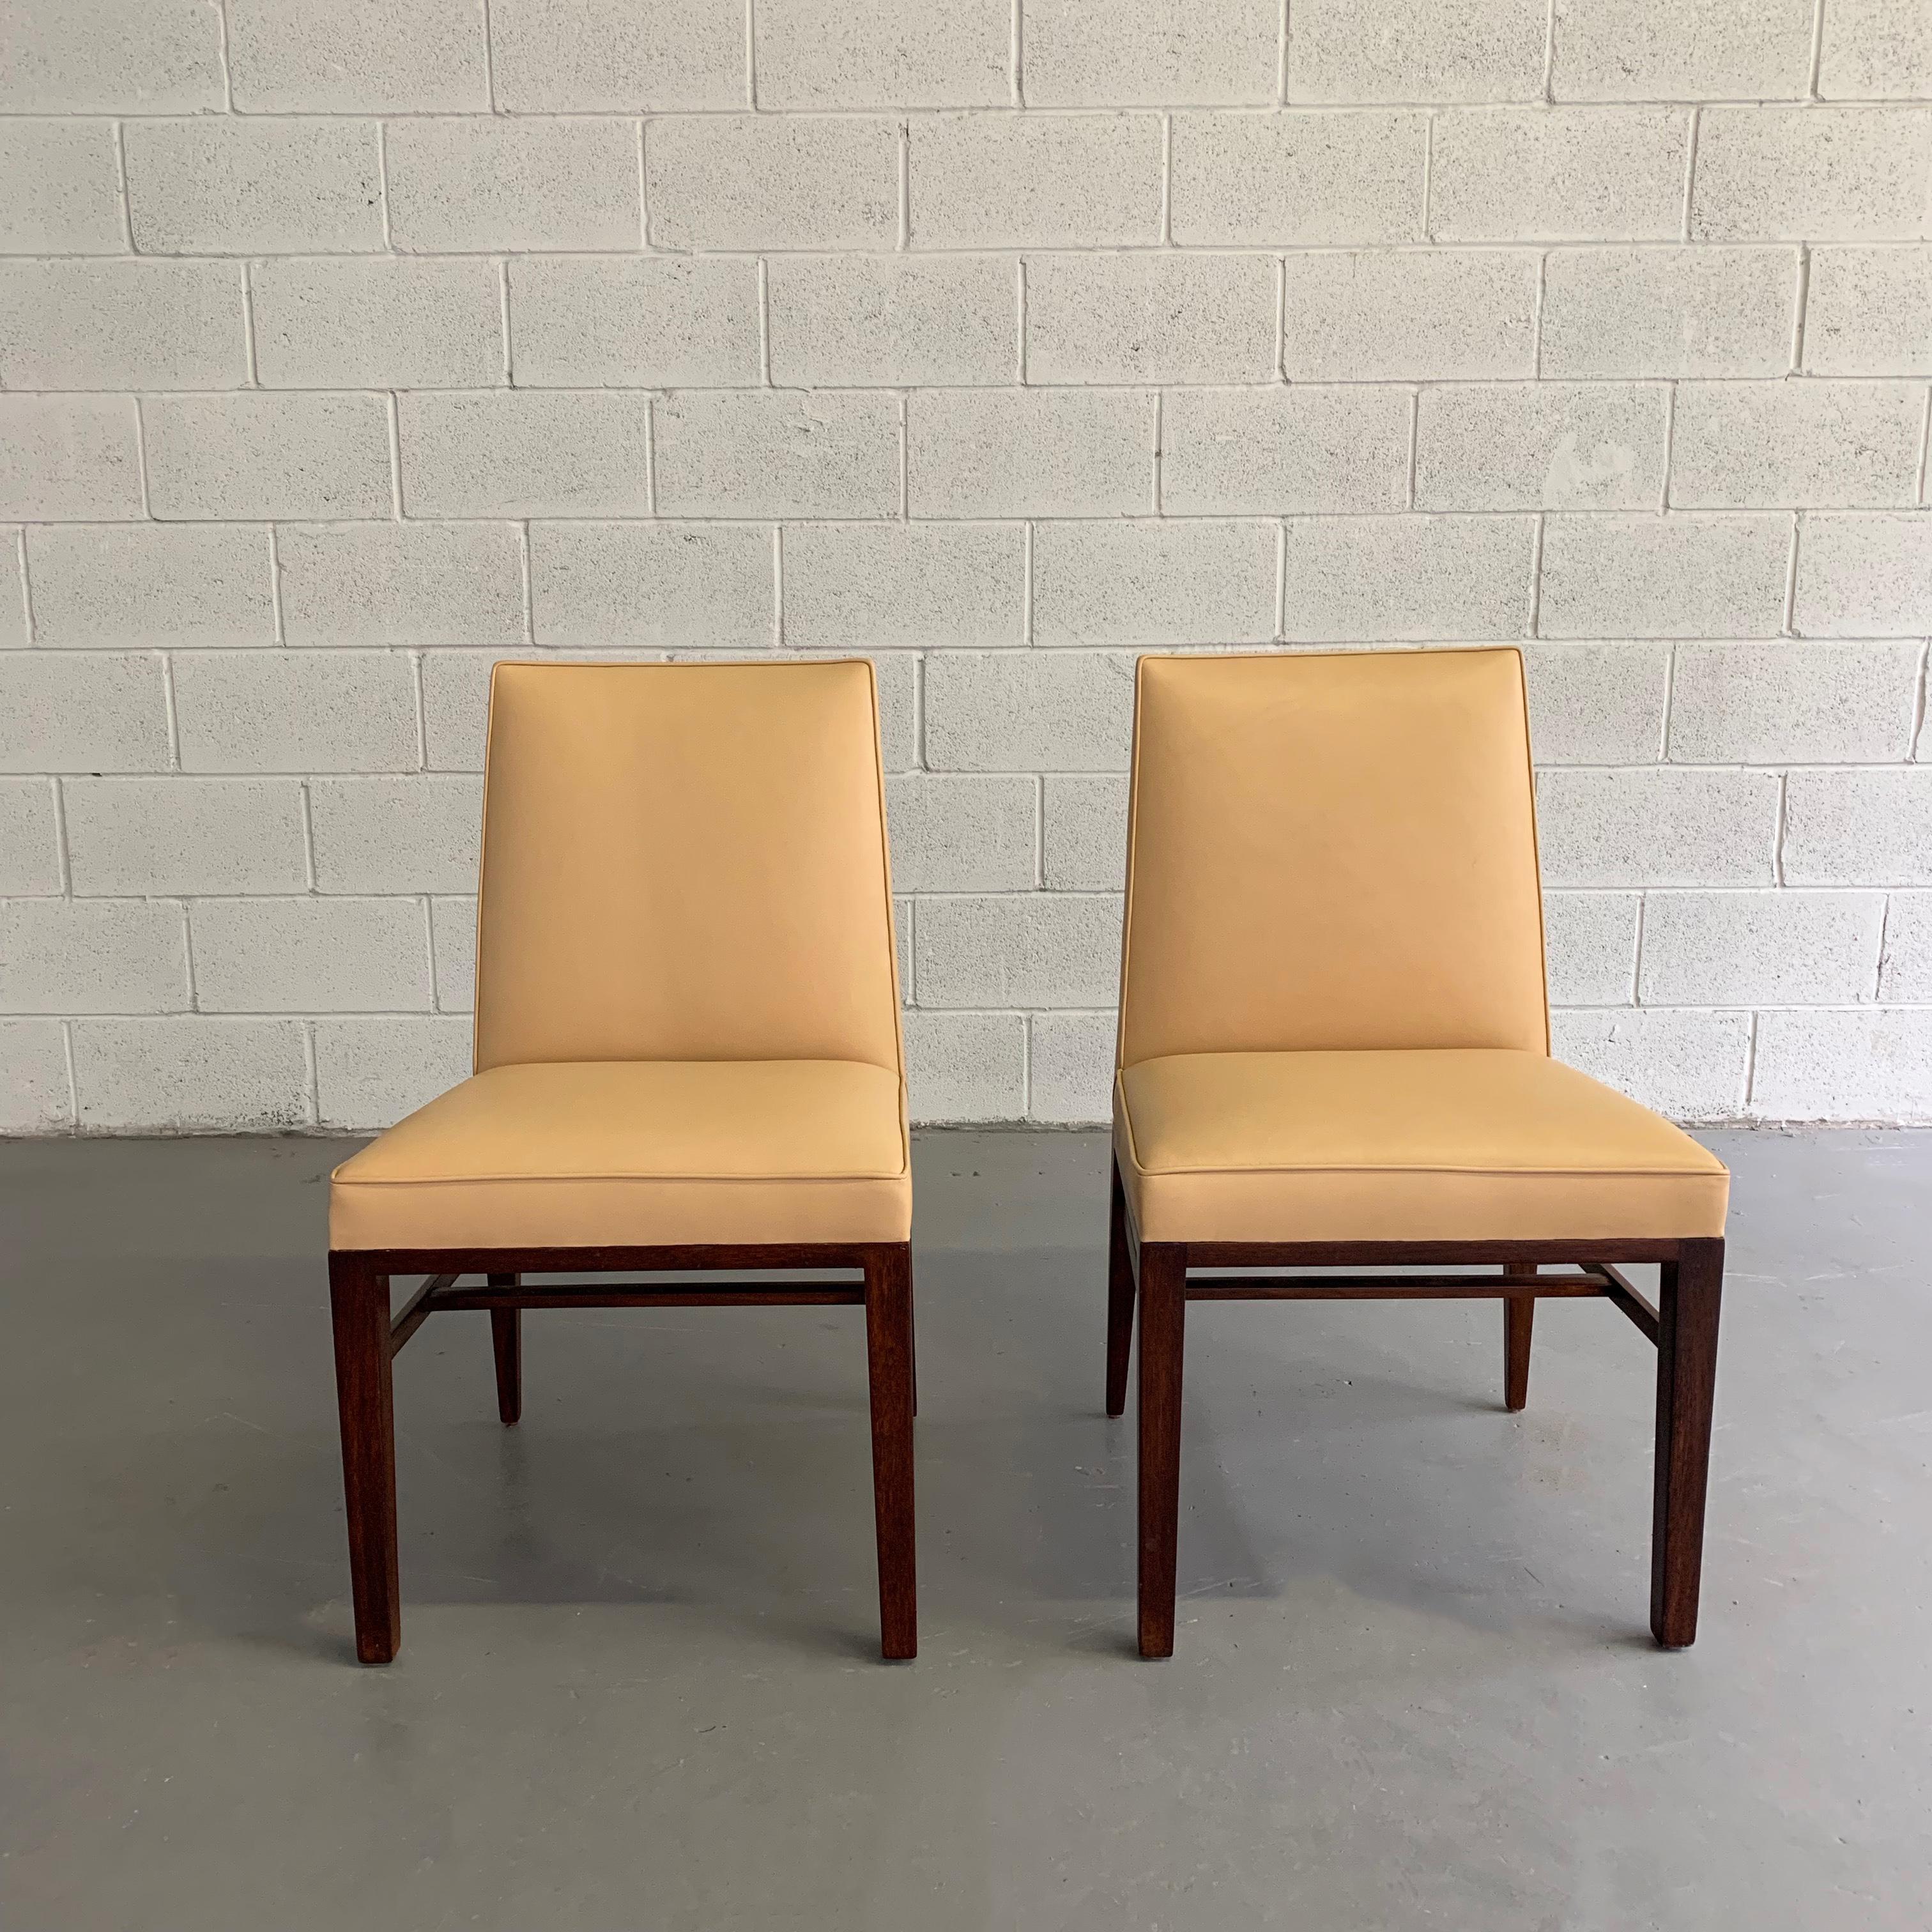 Pair of Edward Wormley for Dunbar Leather Slipper Side Chairs In Good Condition For Sale In Brooklyn, NY